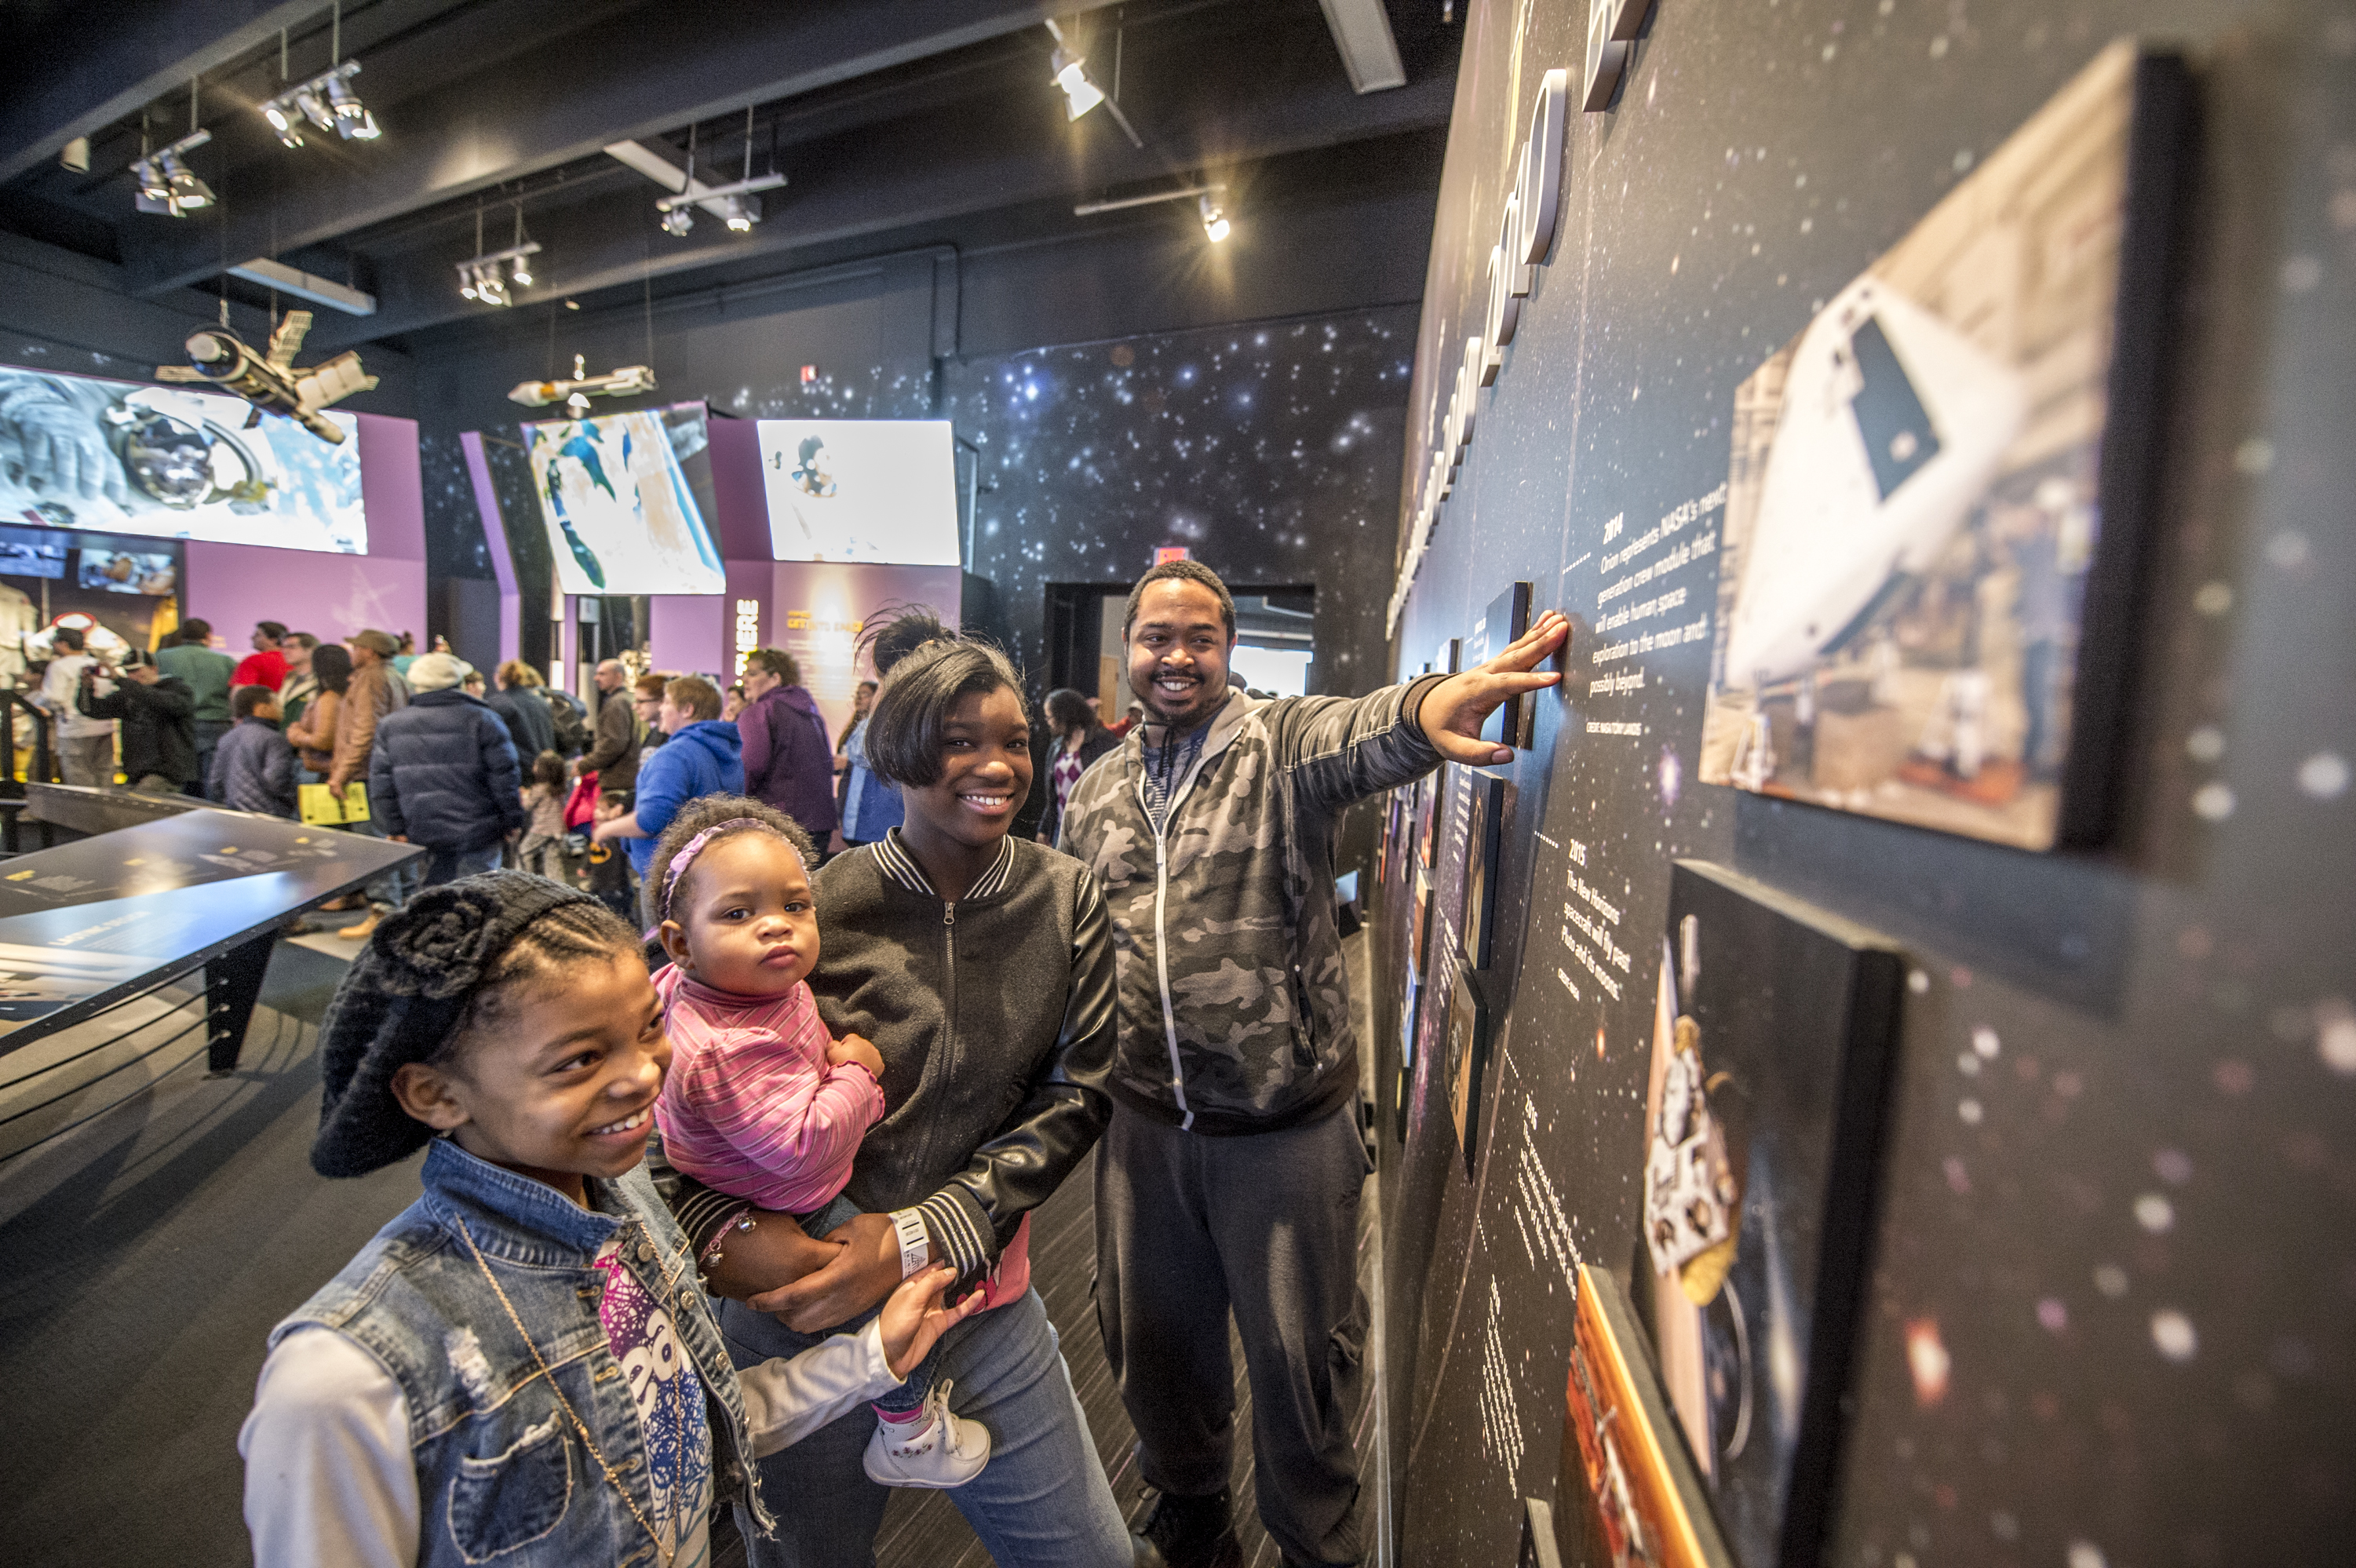 Great Lakes Science Center offers free admission for Martin Luther King Jr. Day